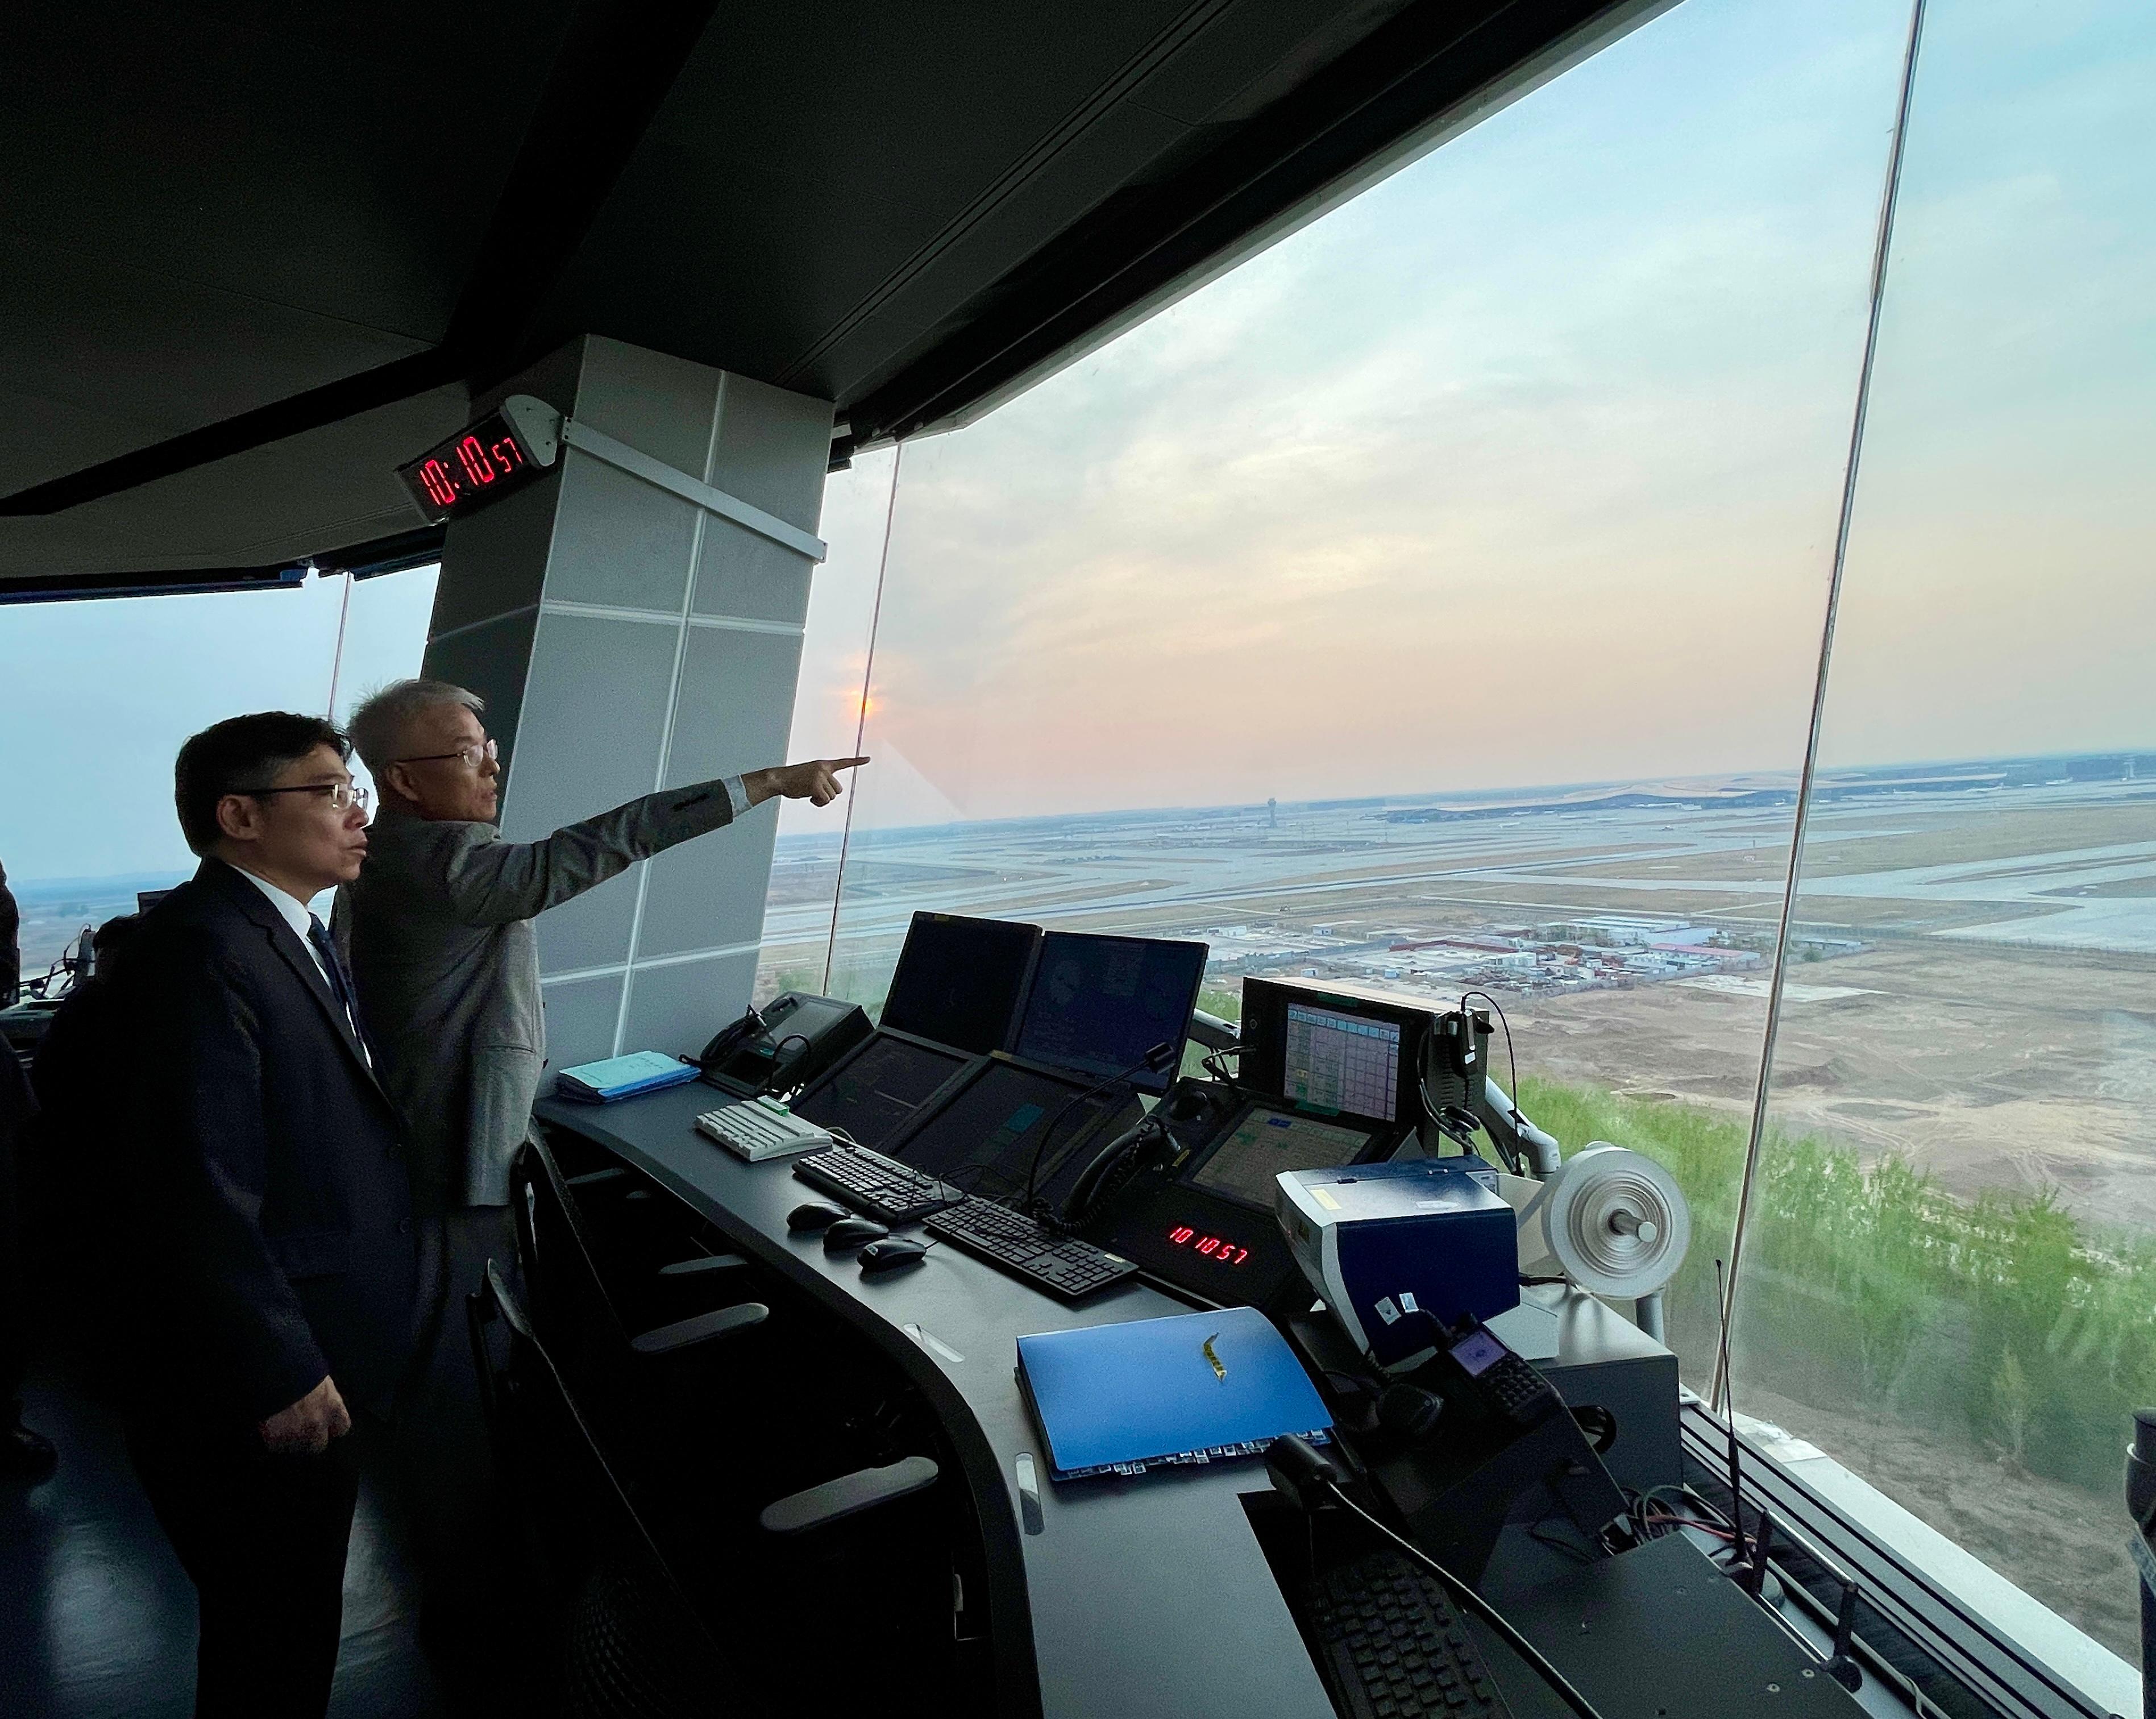 The Secretary for Transport and Logistics, Mr Lam Sai-hung, visited the control tower at Beijing Daxing International Airport yesterday (April 9). Photo shows Mr Lam (left) receiving a briefing on the operation of the air traffic control centre.